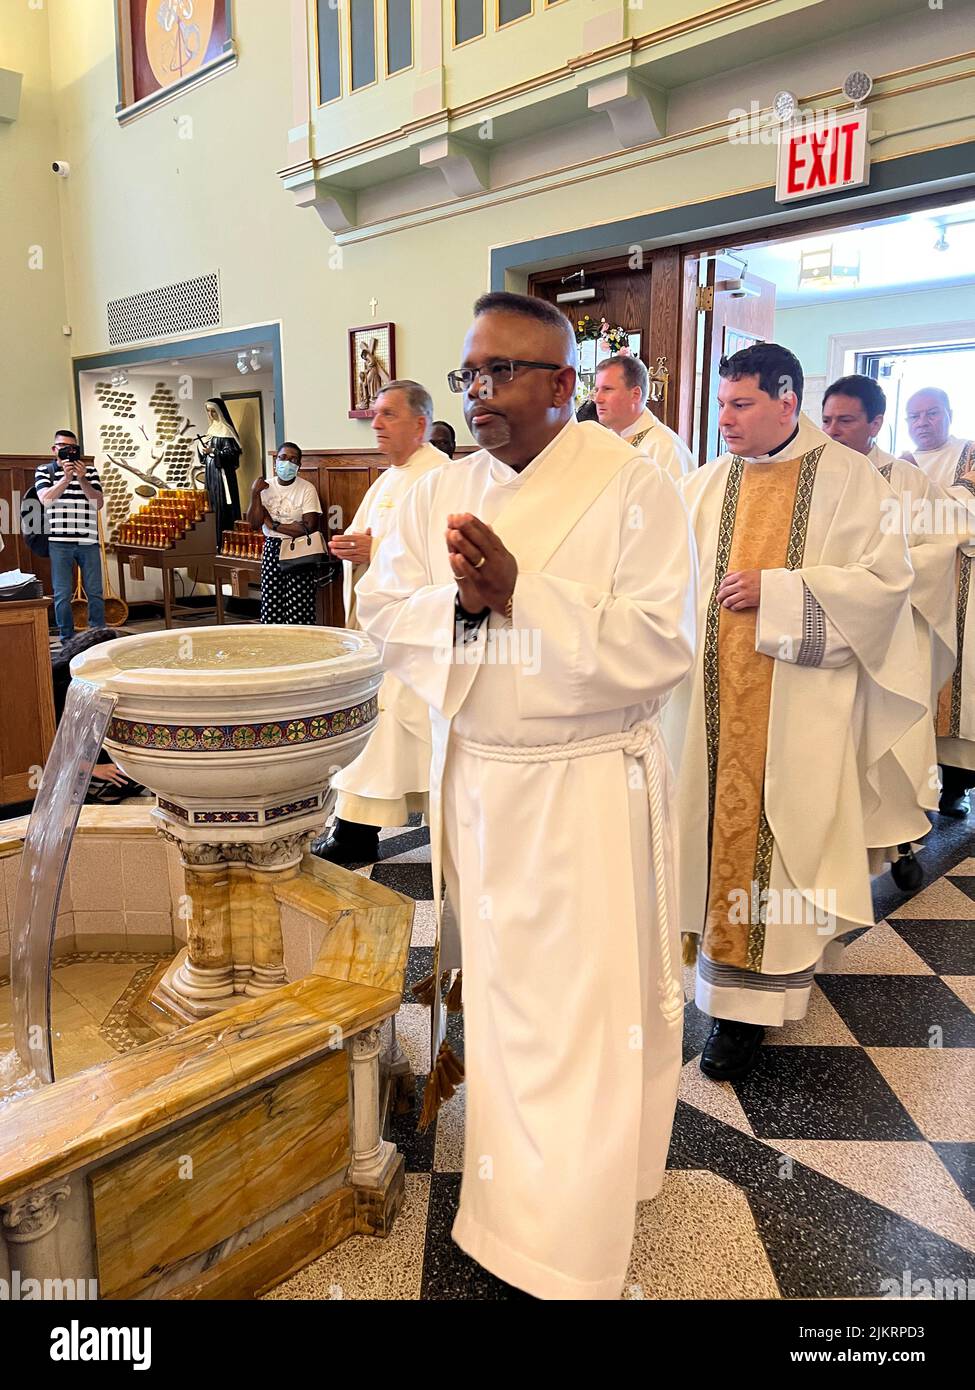 Clergy procession to the alter for mass at Our Lady of Mount Saint Carmel in Williamsburg Brooklyn; New York. Stock Photo